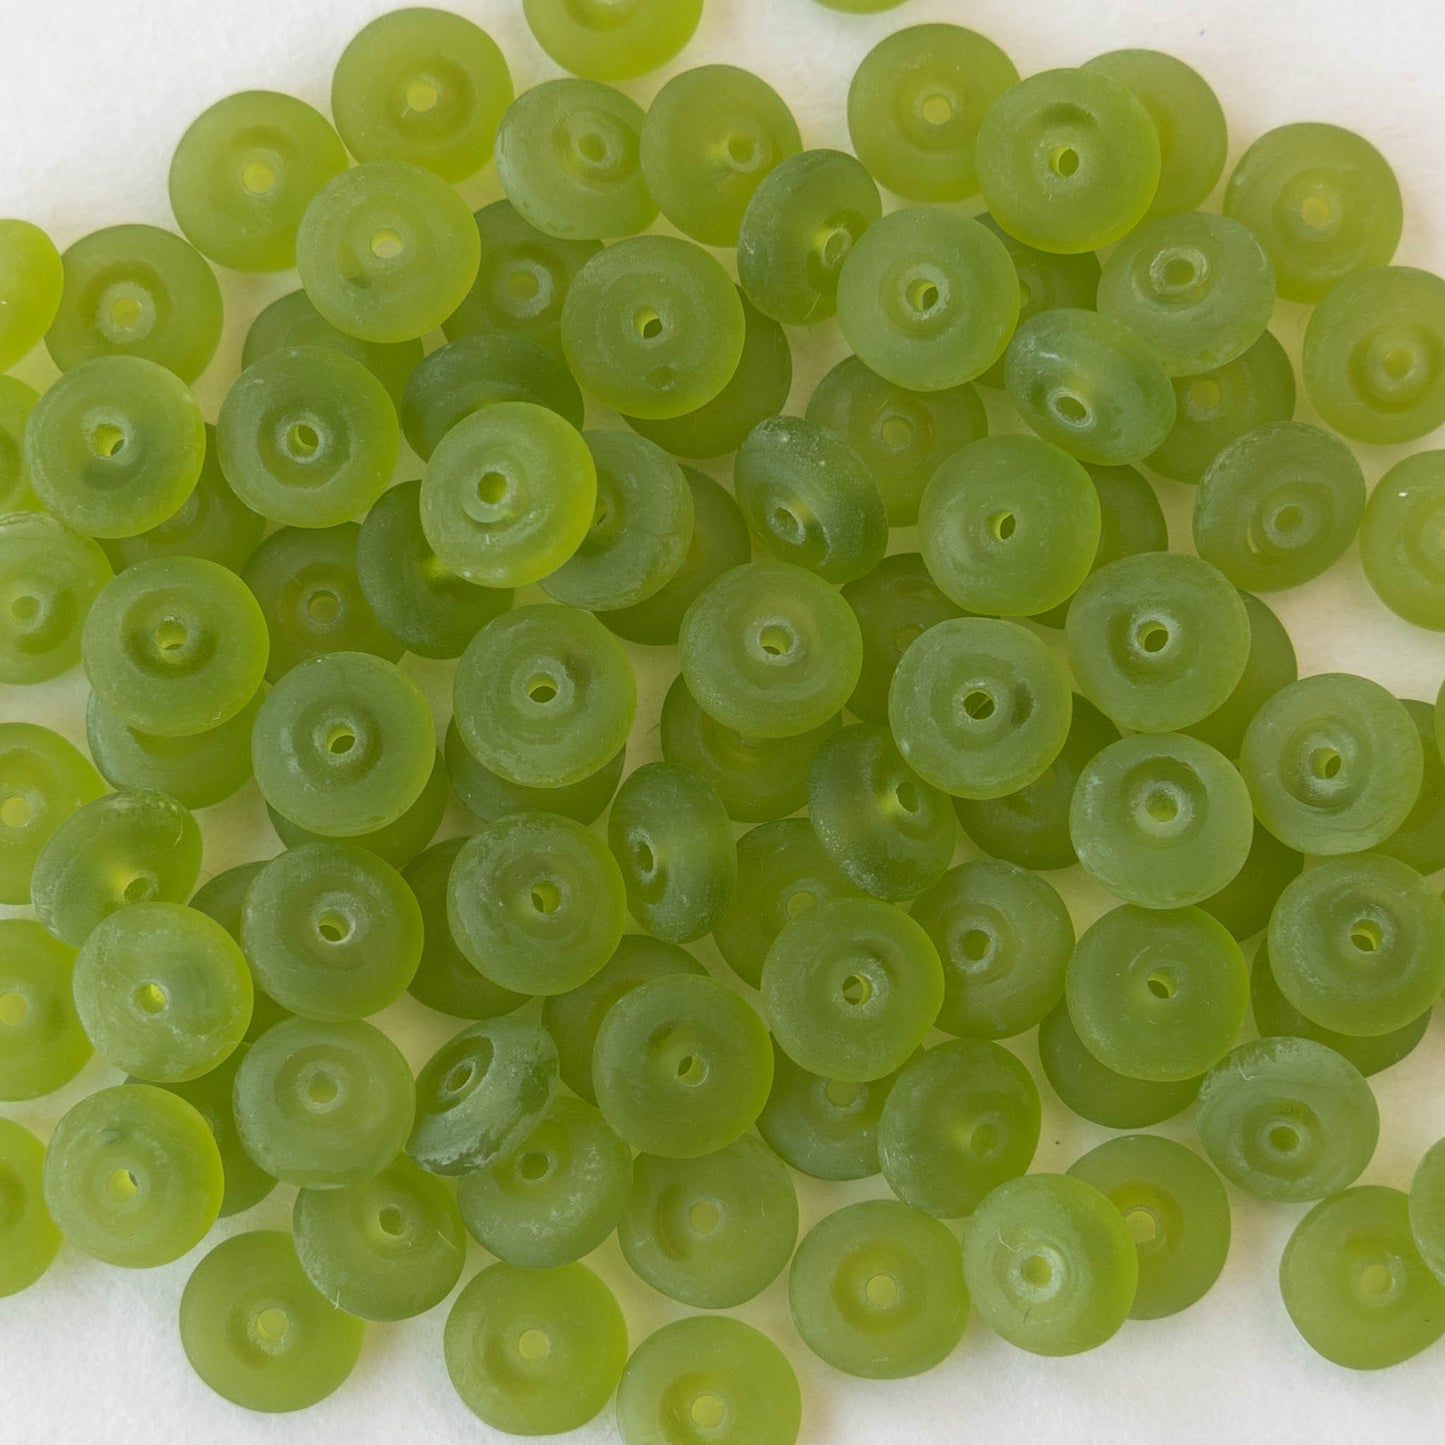 6mm Rondelle Beads - Lime Green Matte - 100 Beads